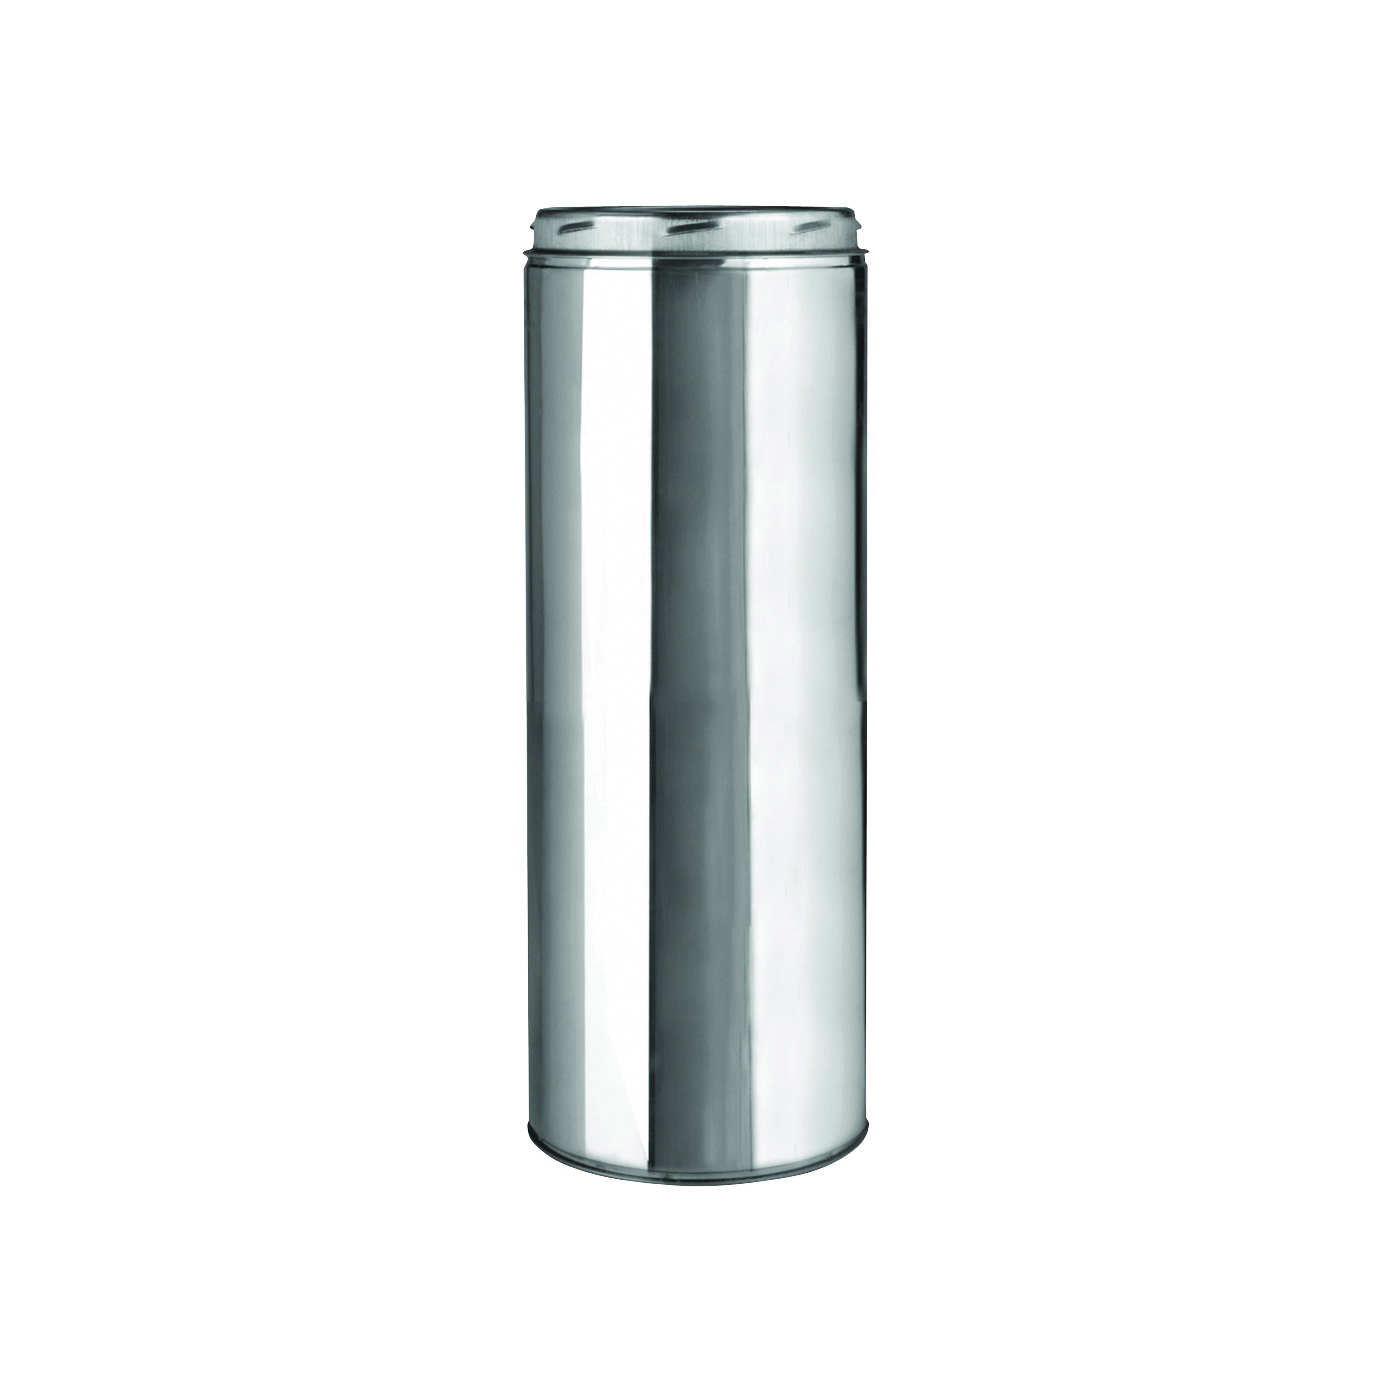 206018 Chimney Pipe, 8 in OD, 18 in L, Stainless Steel